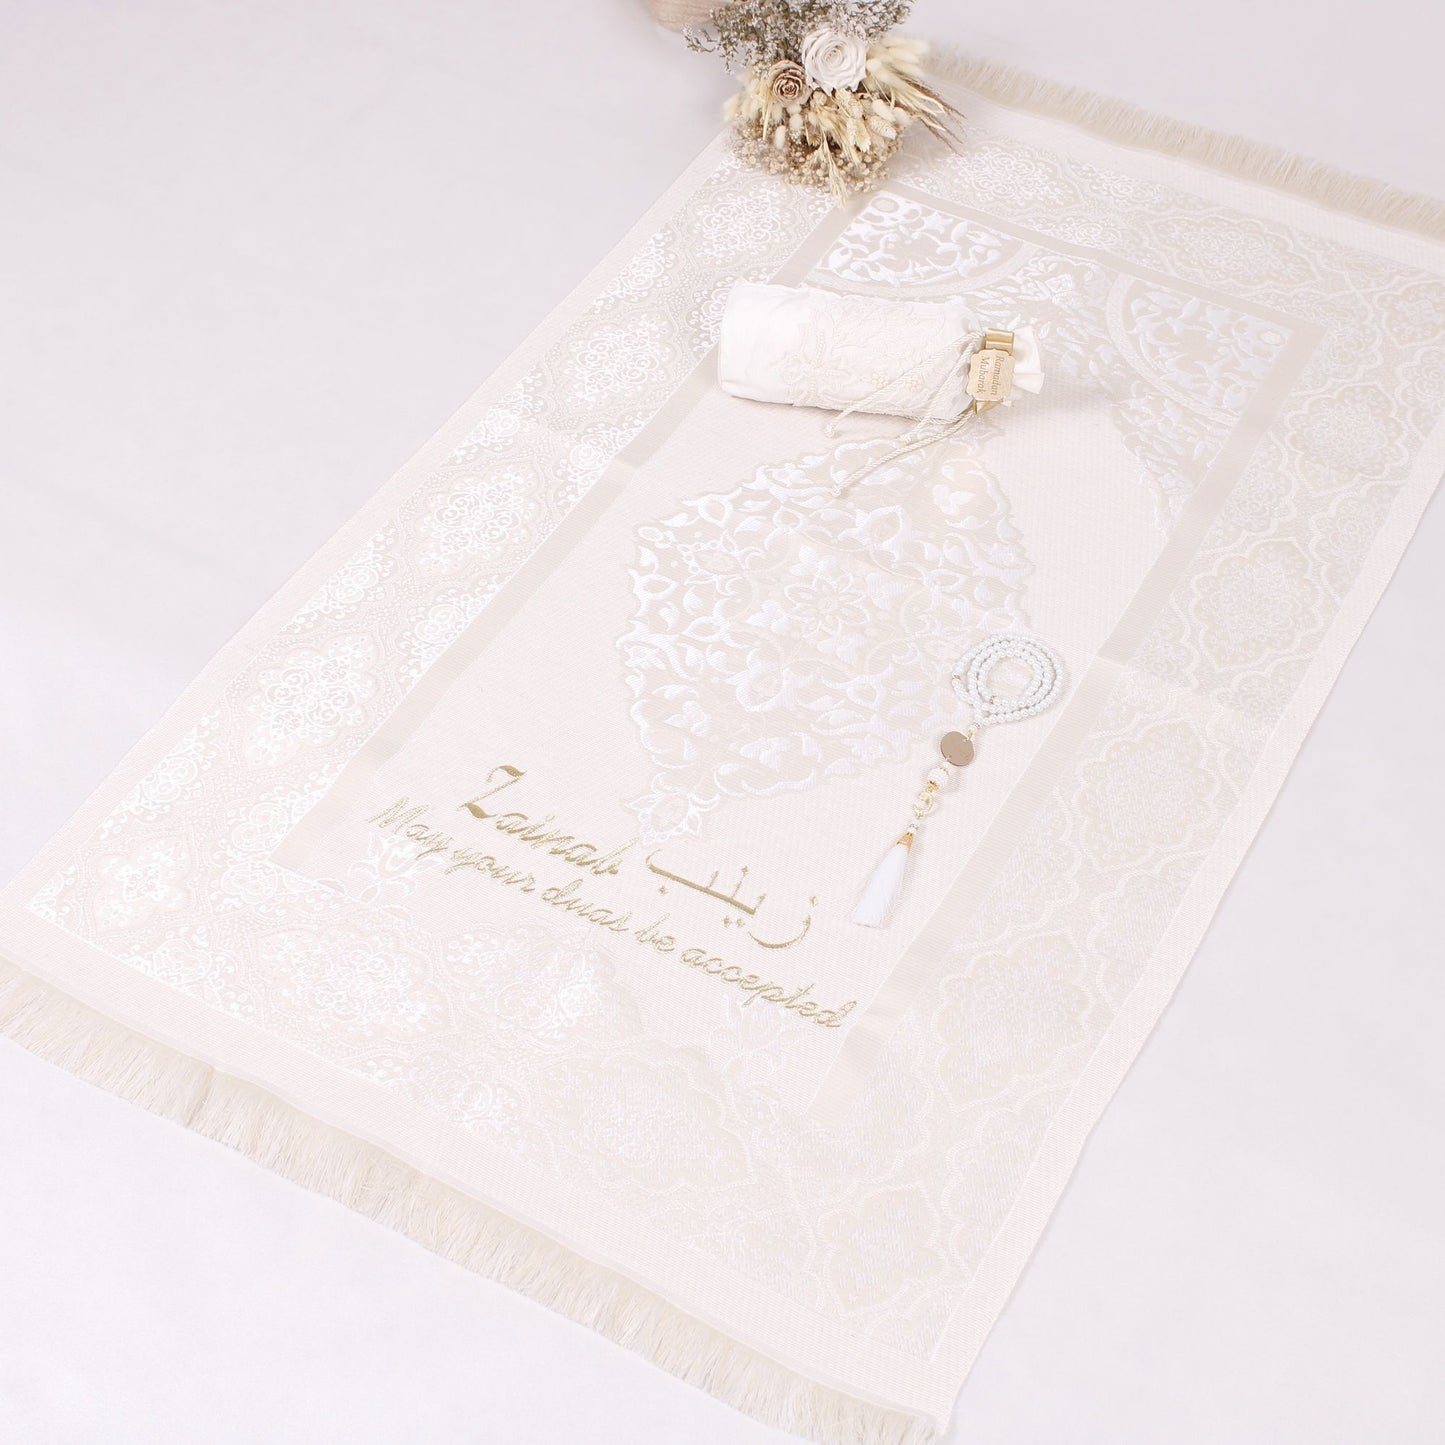 Personalized Pouch Travel Prayer Mat Tasbeeh Islamic Muslim Gift Set - Islamic Elite Favors is a handmade gift shop offering a wide variety of unique and personalized gifts for all occasions. Whether you're looking for the perfect Ramadan, Eid, Hajj, wedding gift or something special for a birthday, baby shower or anniversary, we have something for everyone. High quality, made with love.